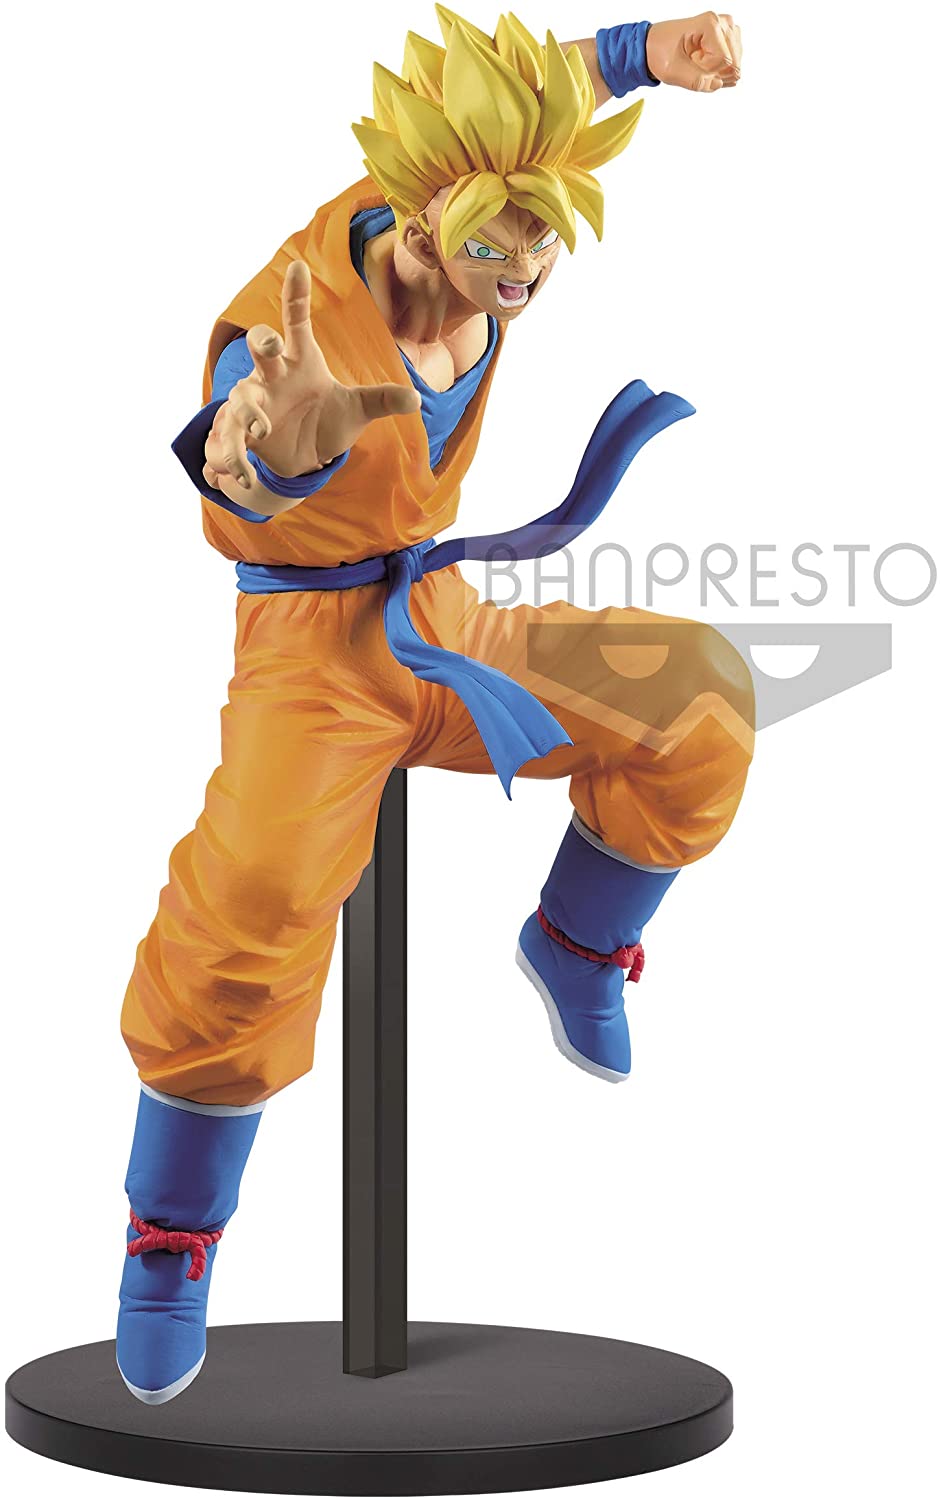 Dragon Ball Legends Collab Son Gohan Figure - Super Anime Store FREE SHIPPING FAST SHIPPING USA